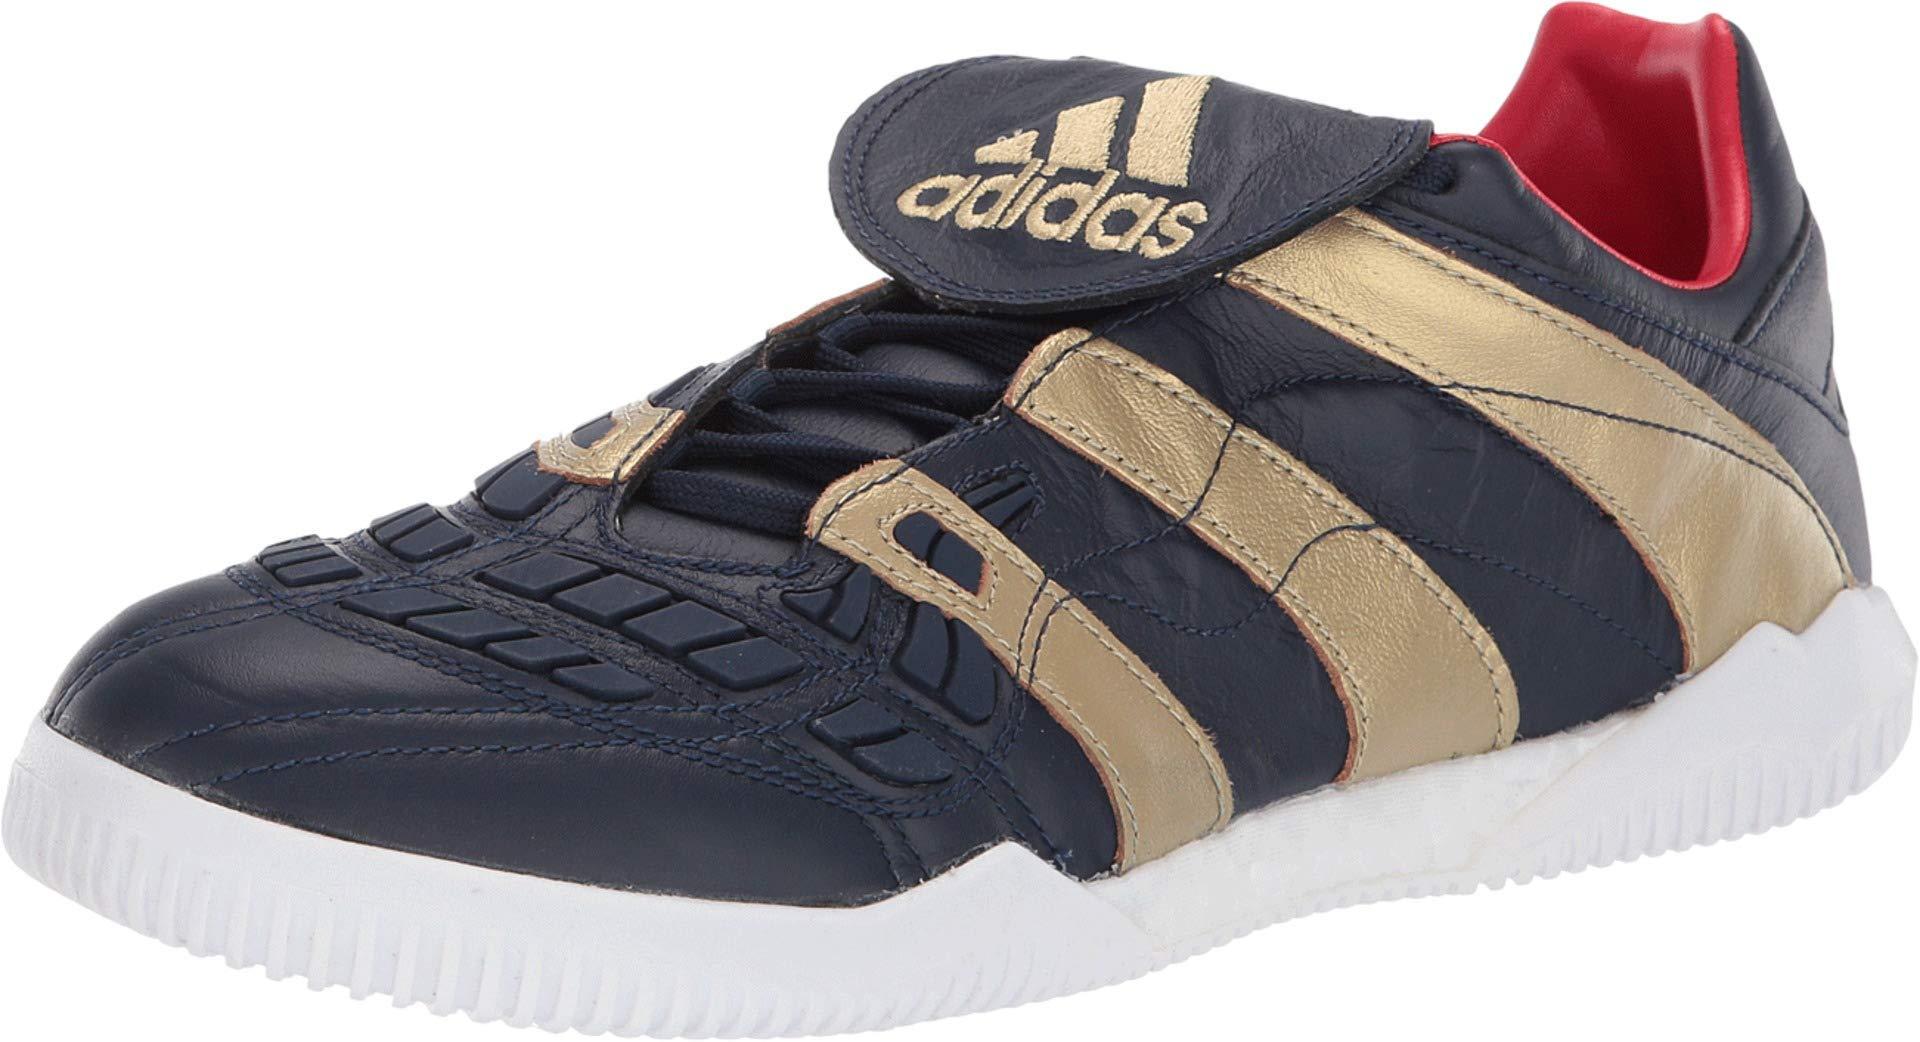 adidas Predator Accelerator Tr 25 Year Pack Zidane in Navy Gold Red (Blue)  for Men | Lyst UK